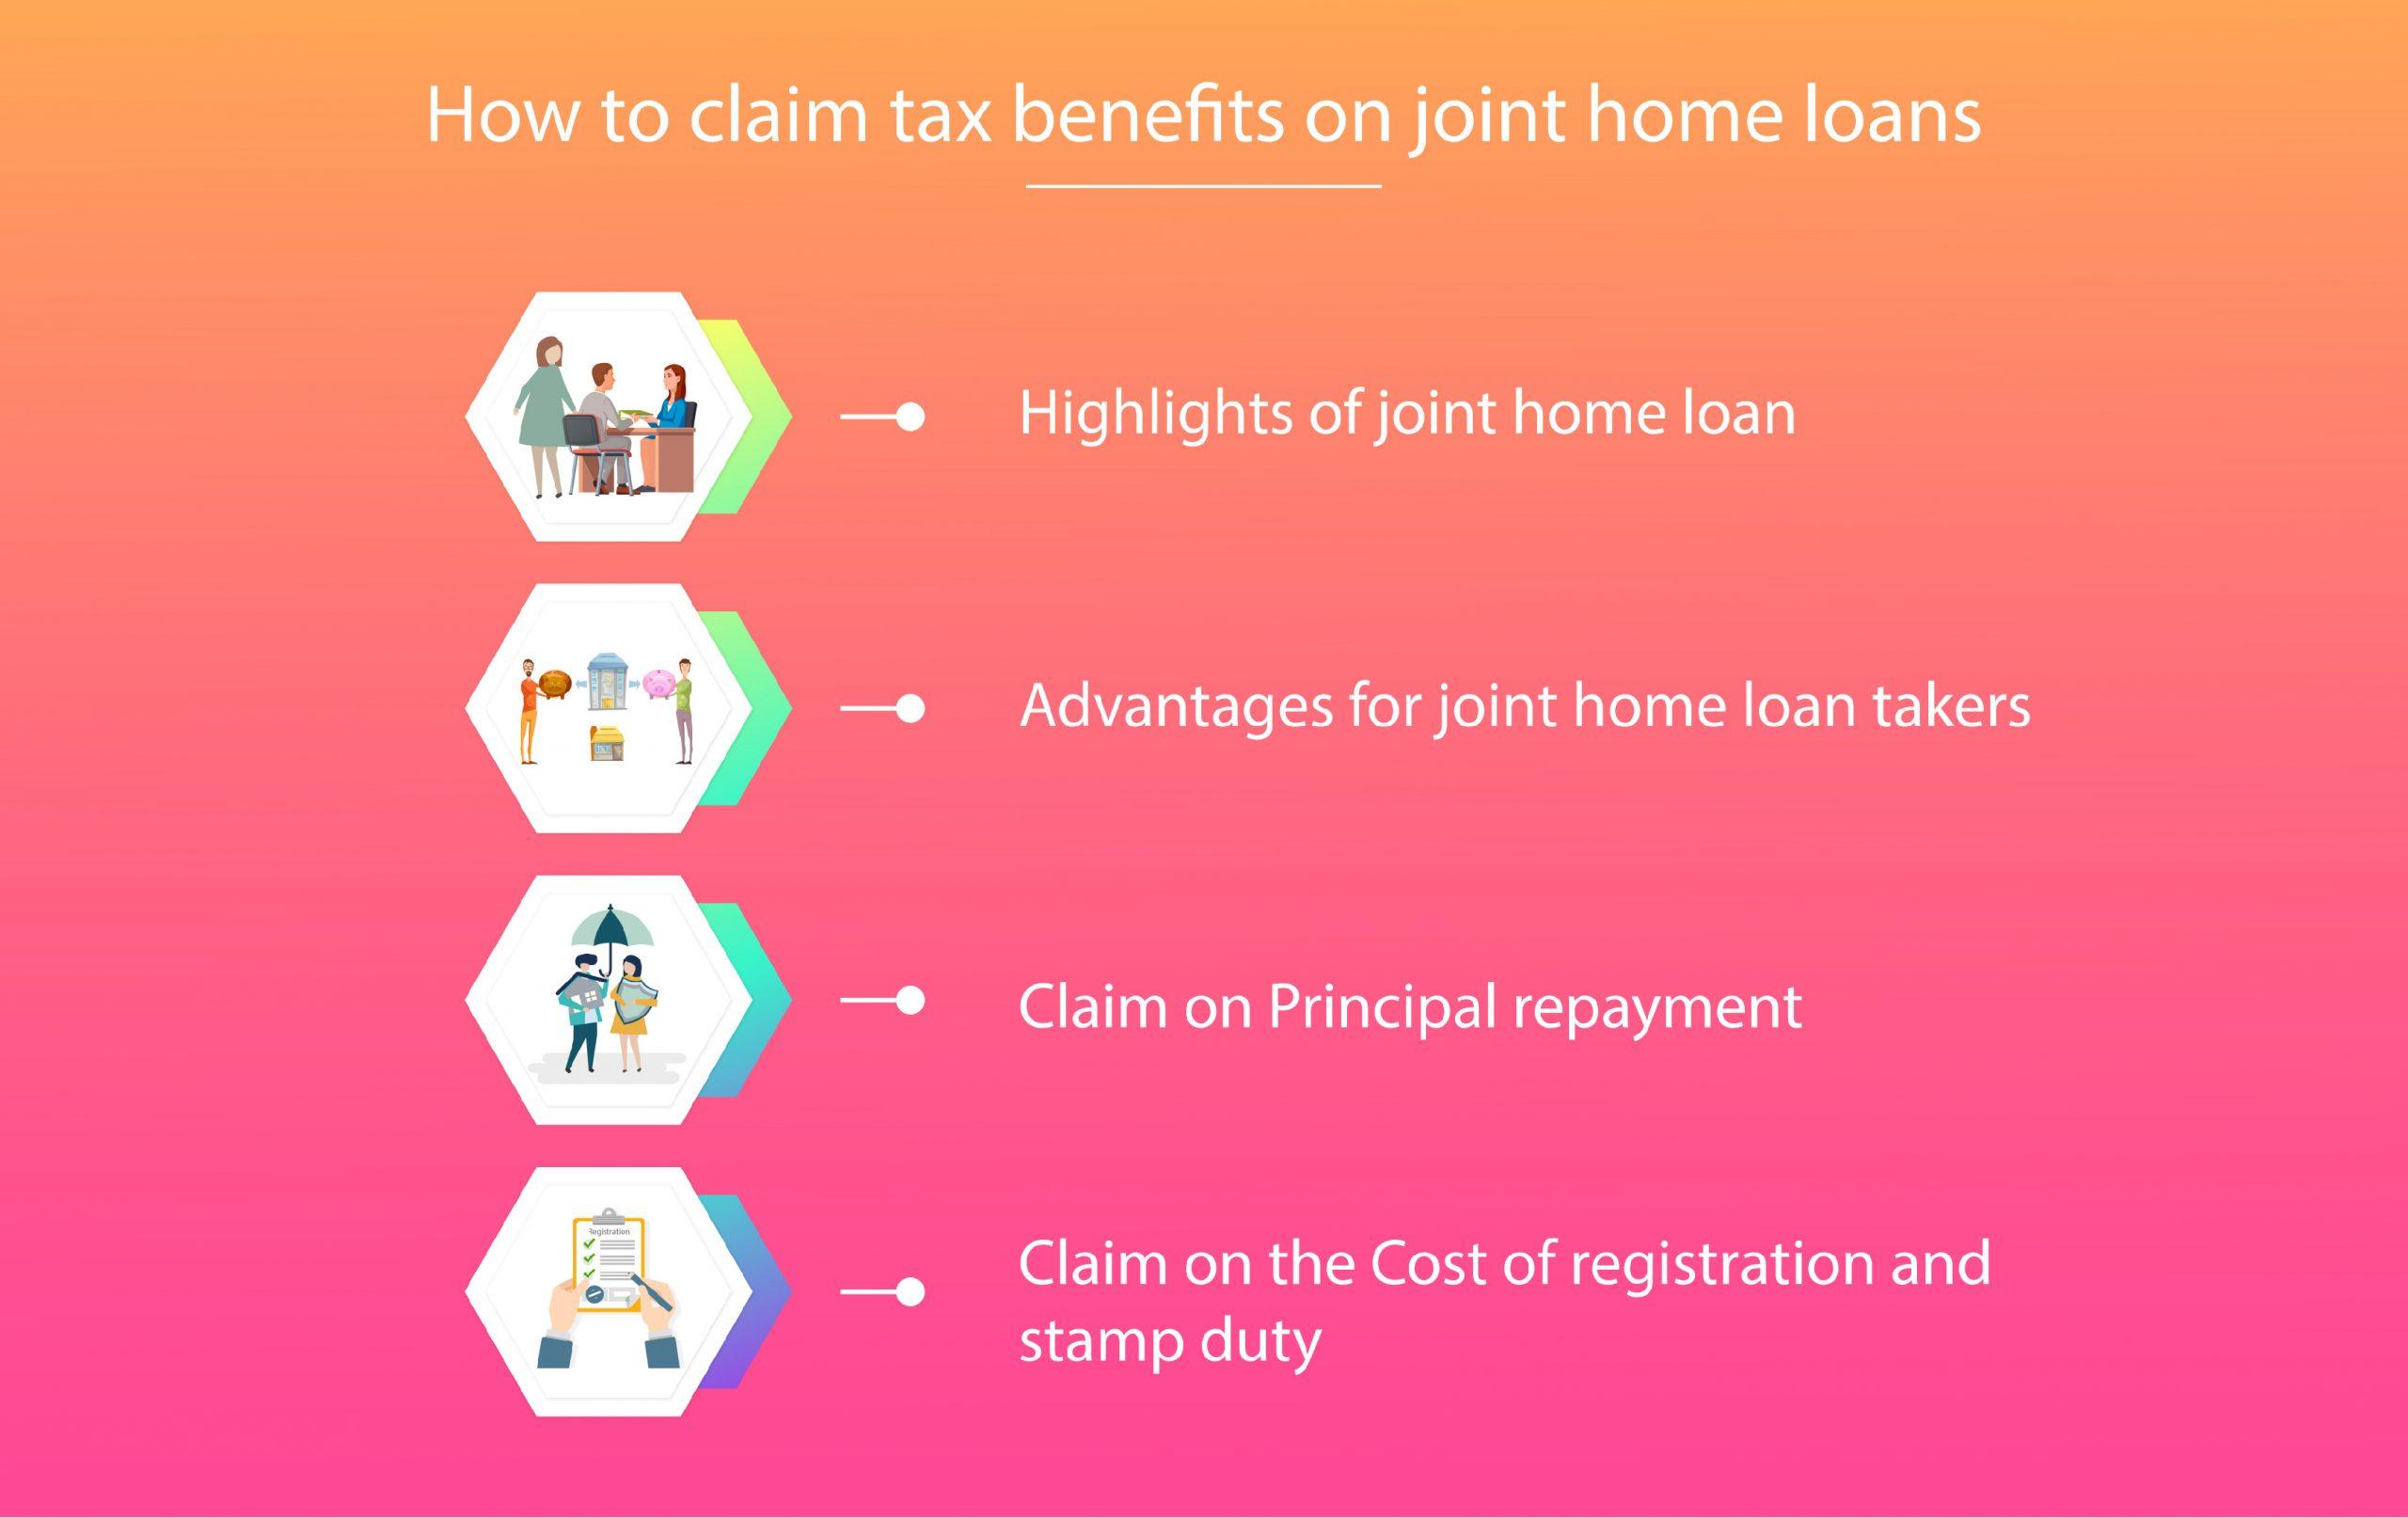 How to claim tax benefits on joint home loans